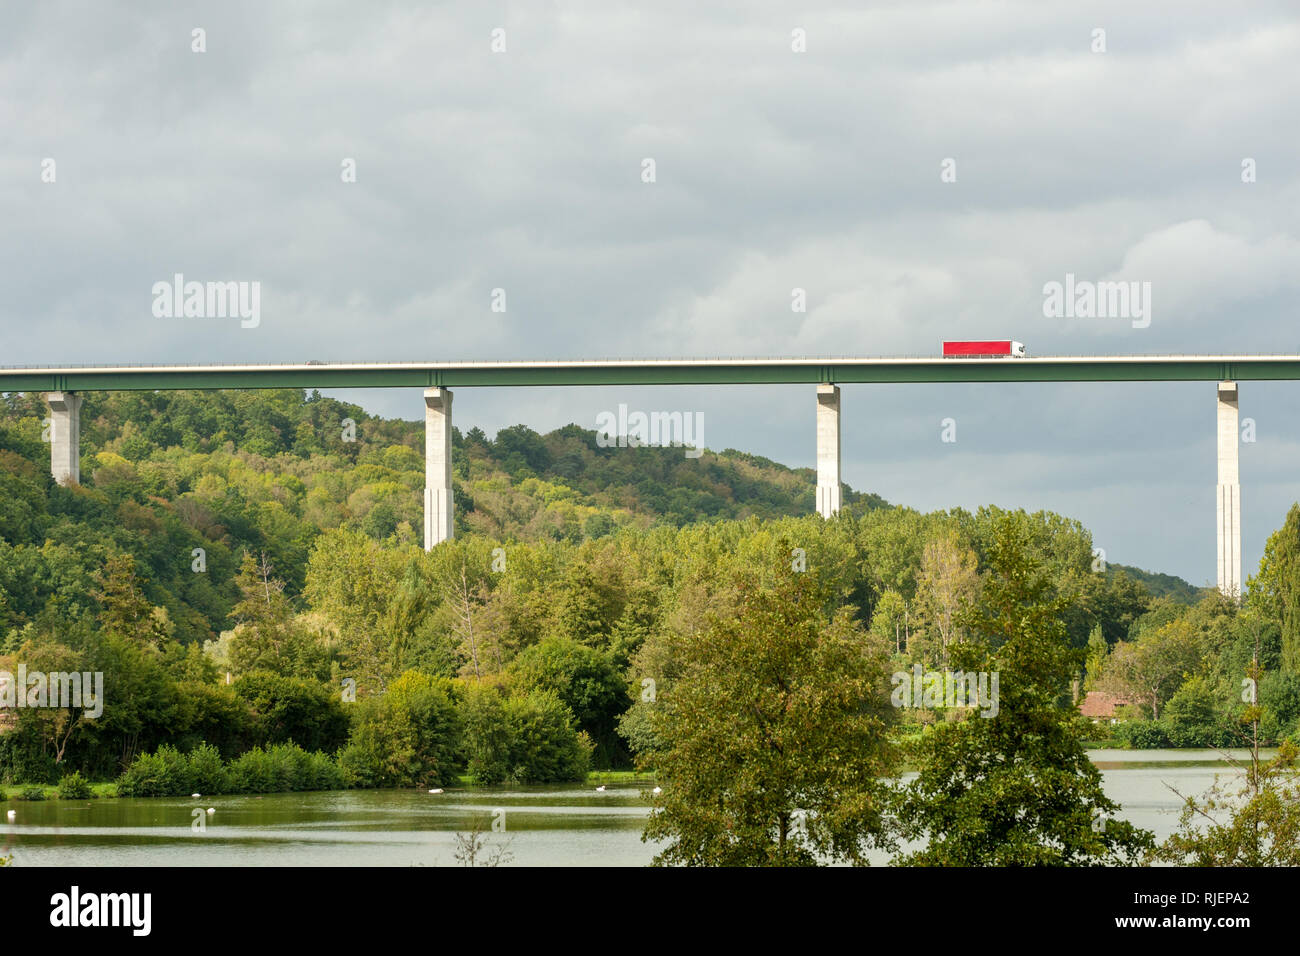 Traffic on the bridge of  A13 motorway from Caen to Paris through Normandy, France Stock Photo